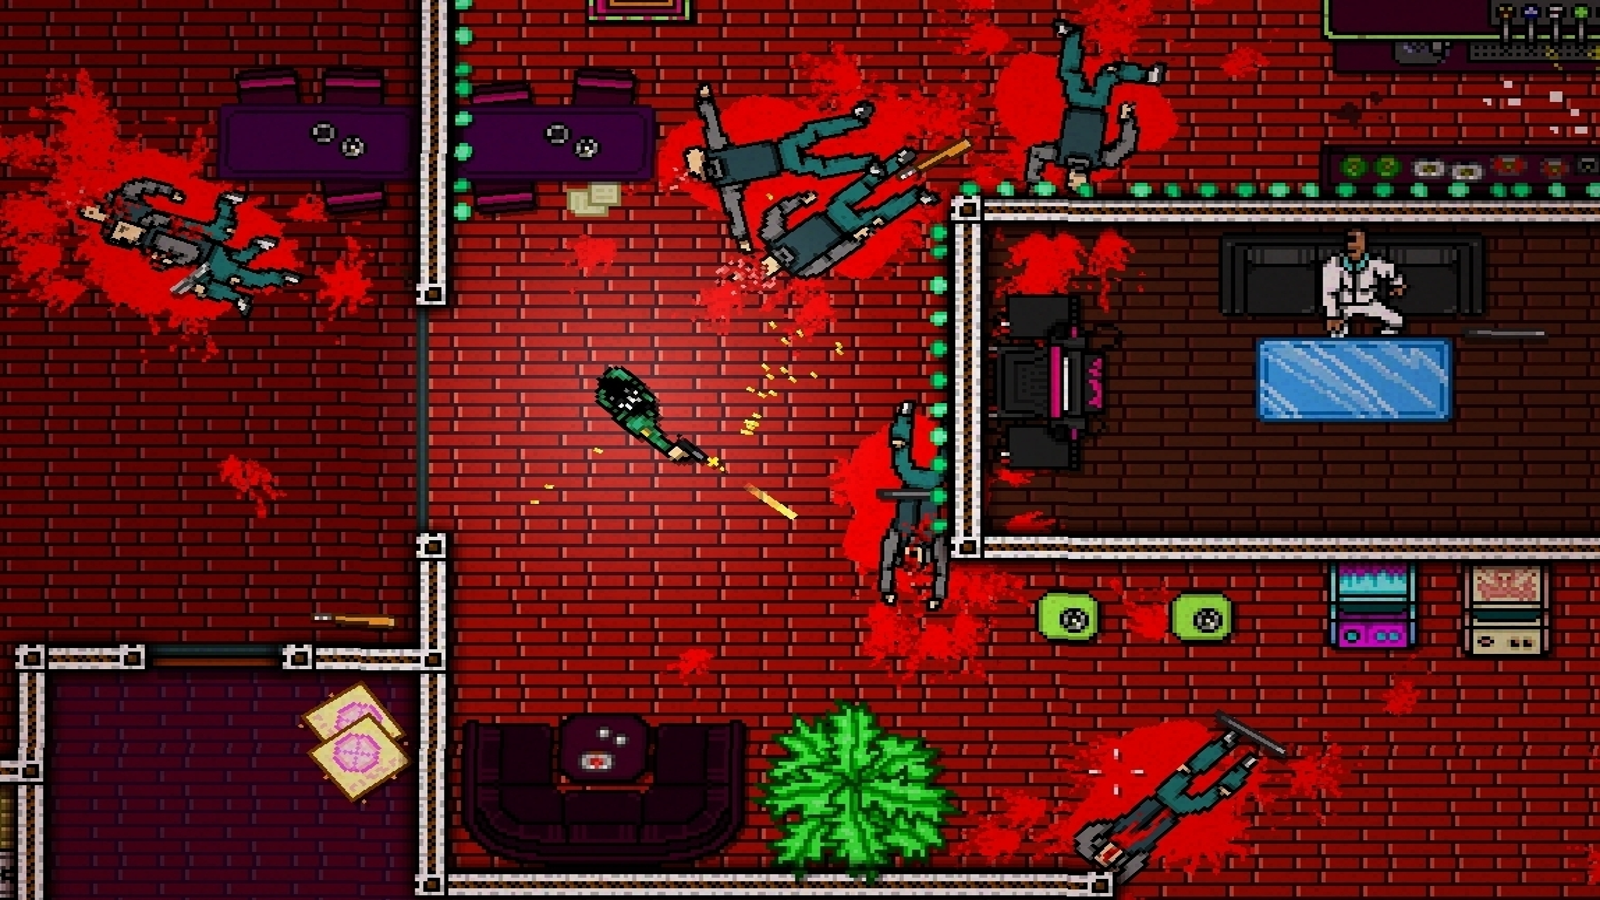 The party's over: Hotline Miami 2 preview 